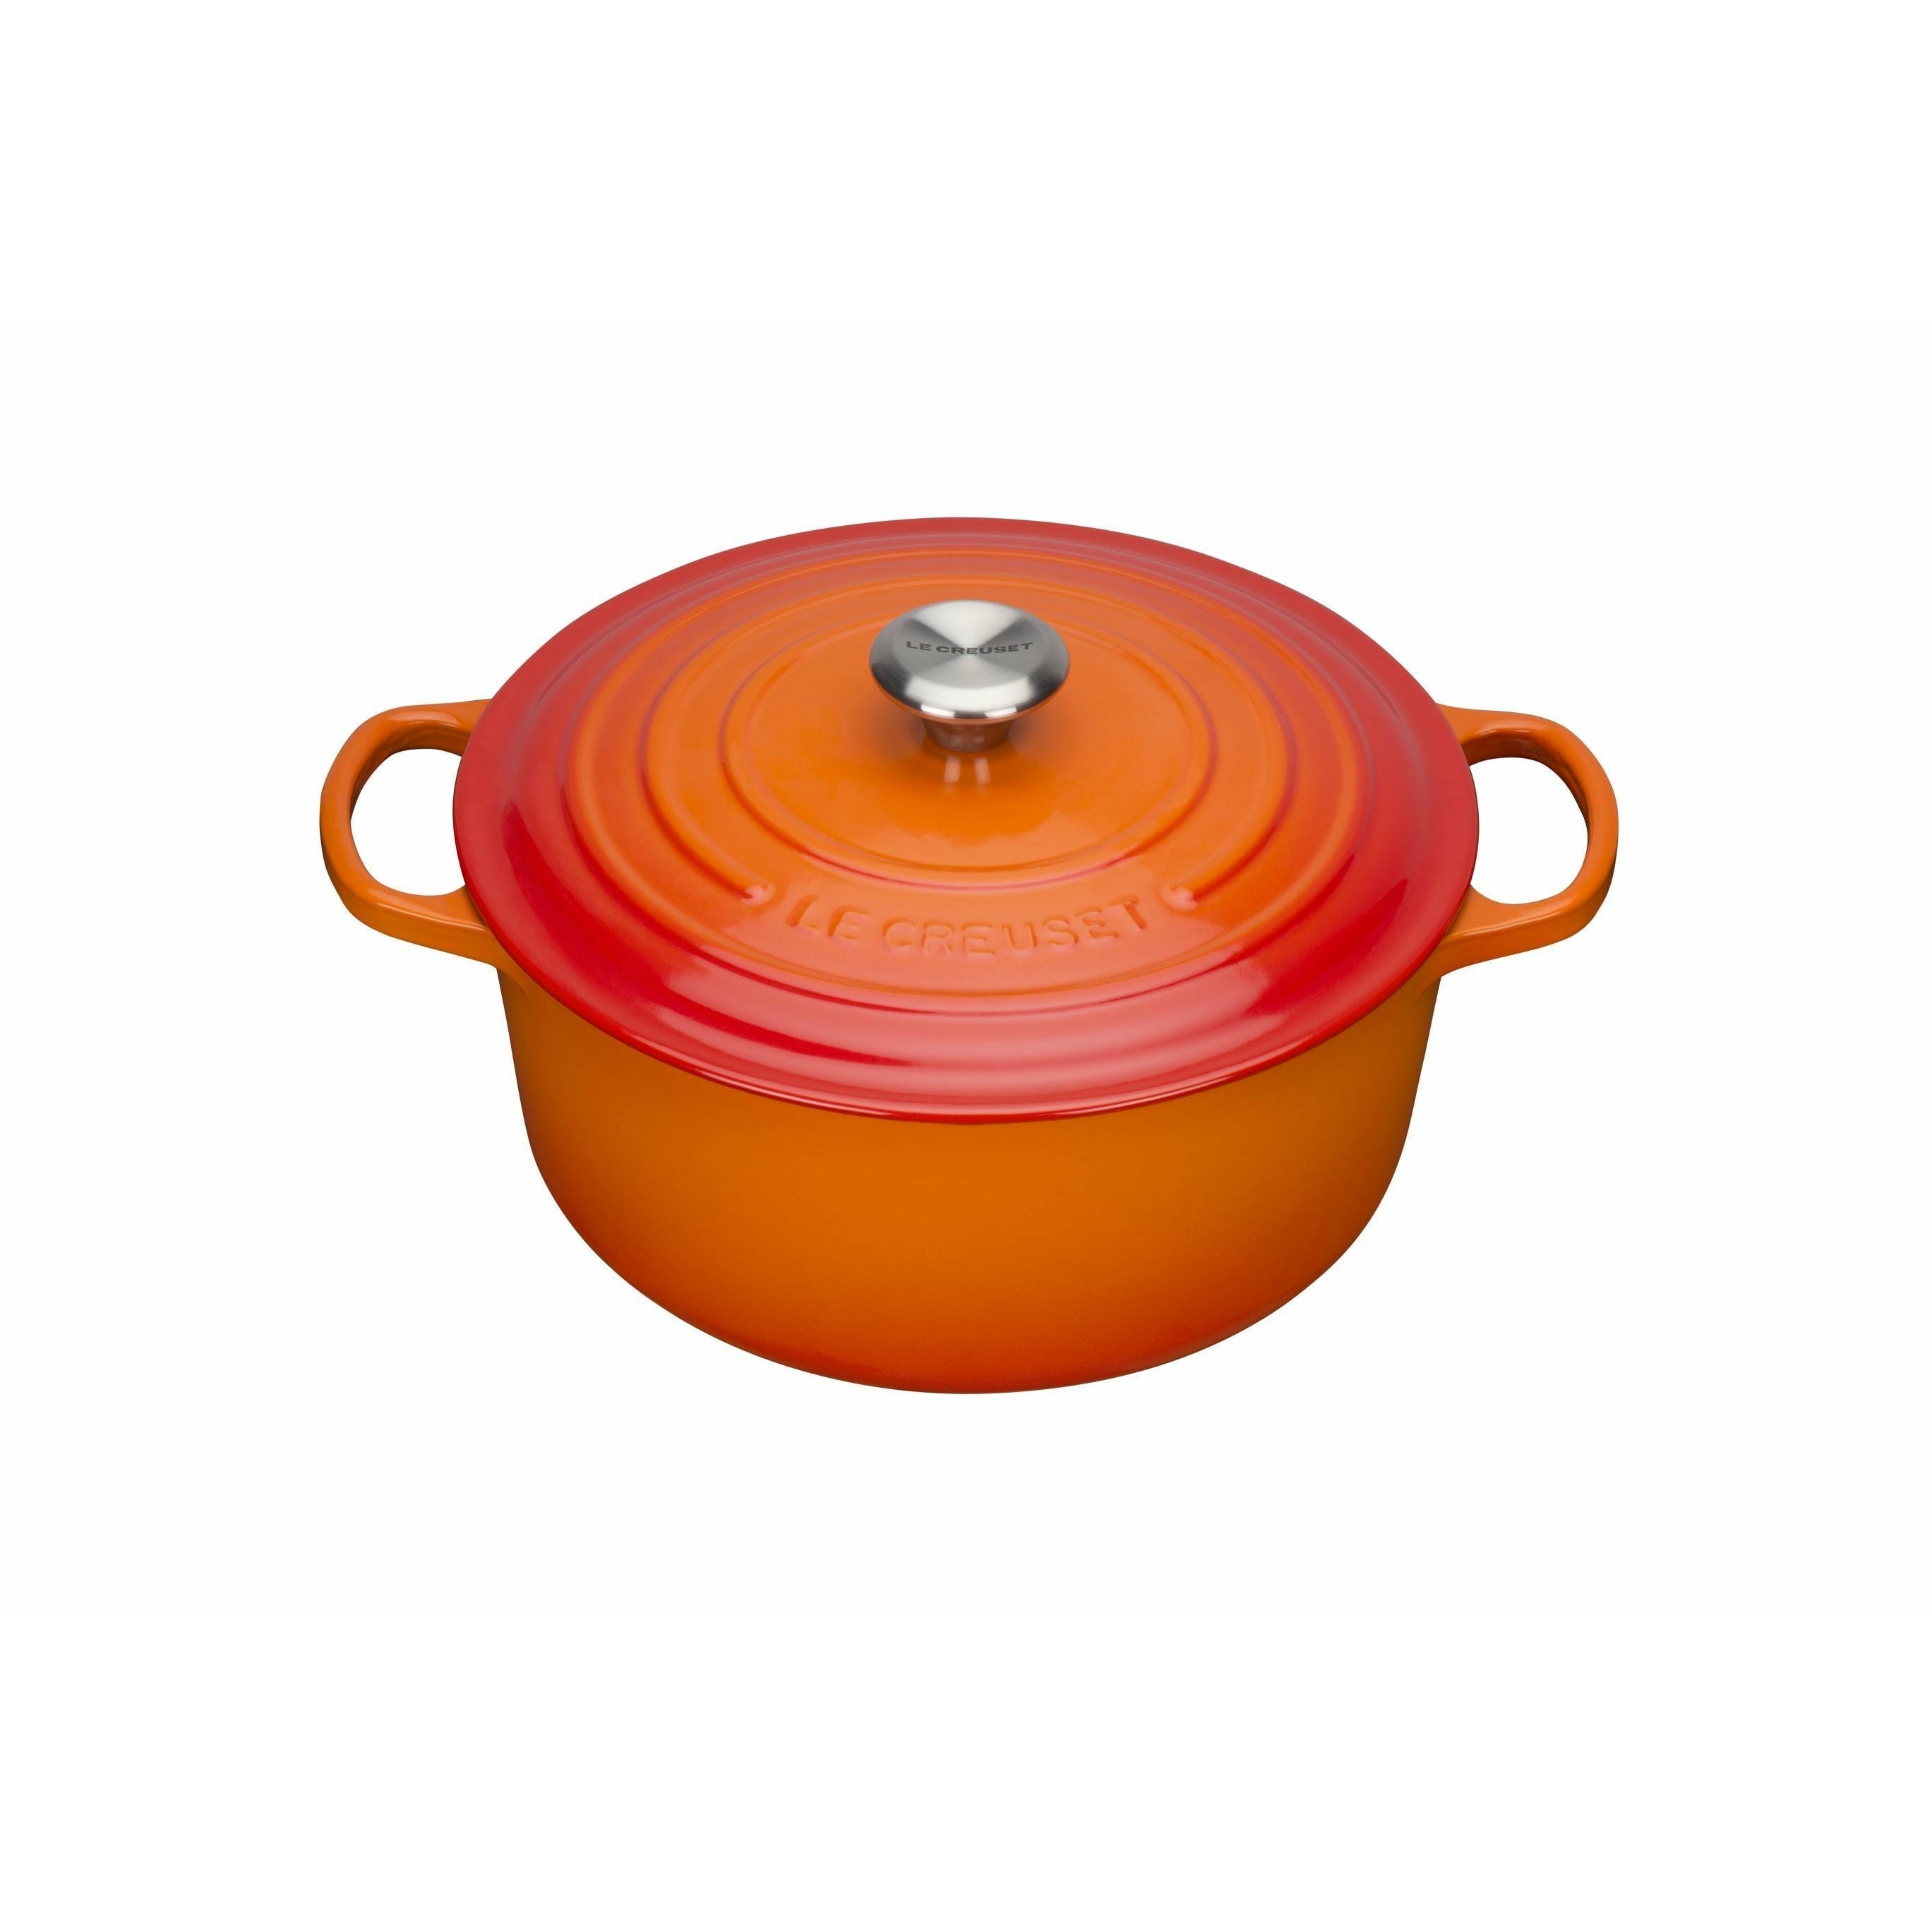 Le Creuset Signature Round Roaster 20 Cm, Oven Red